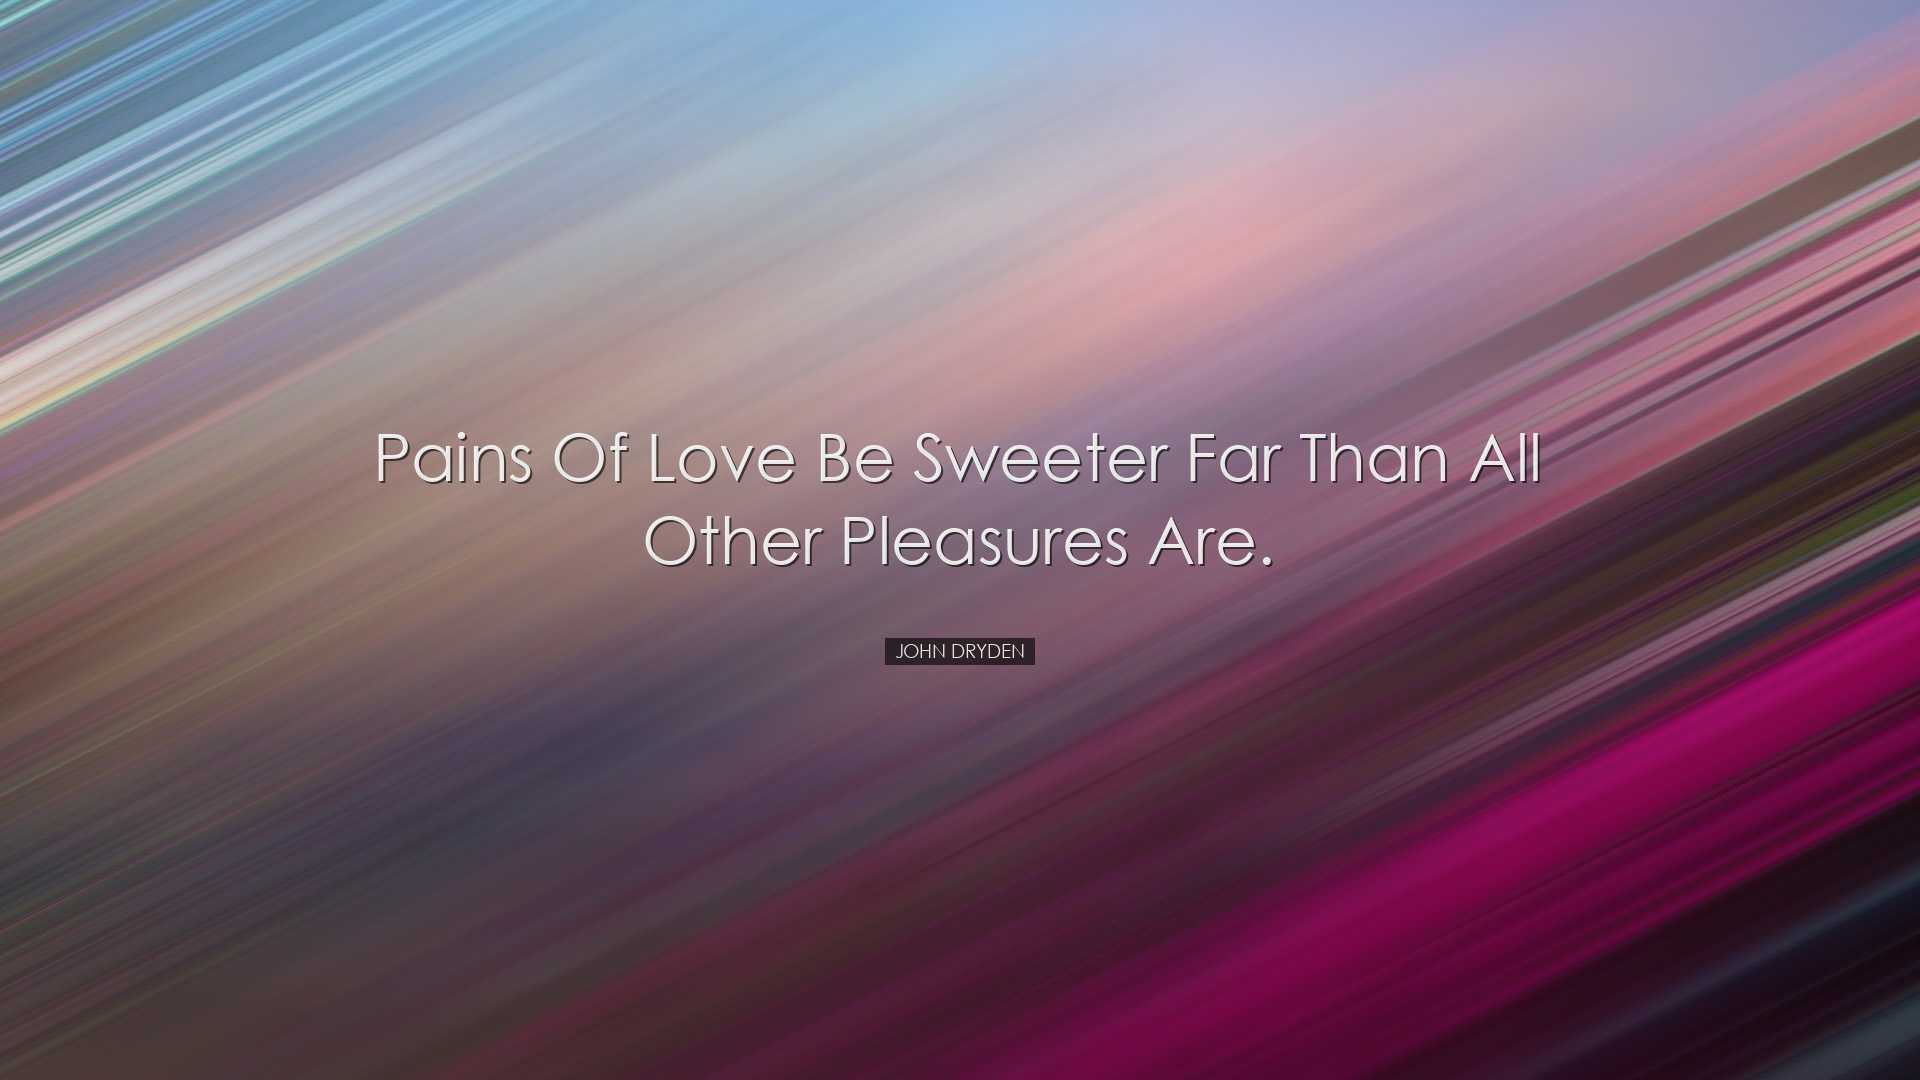 Pains of love be sweeter far than all other pleasures are. - John